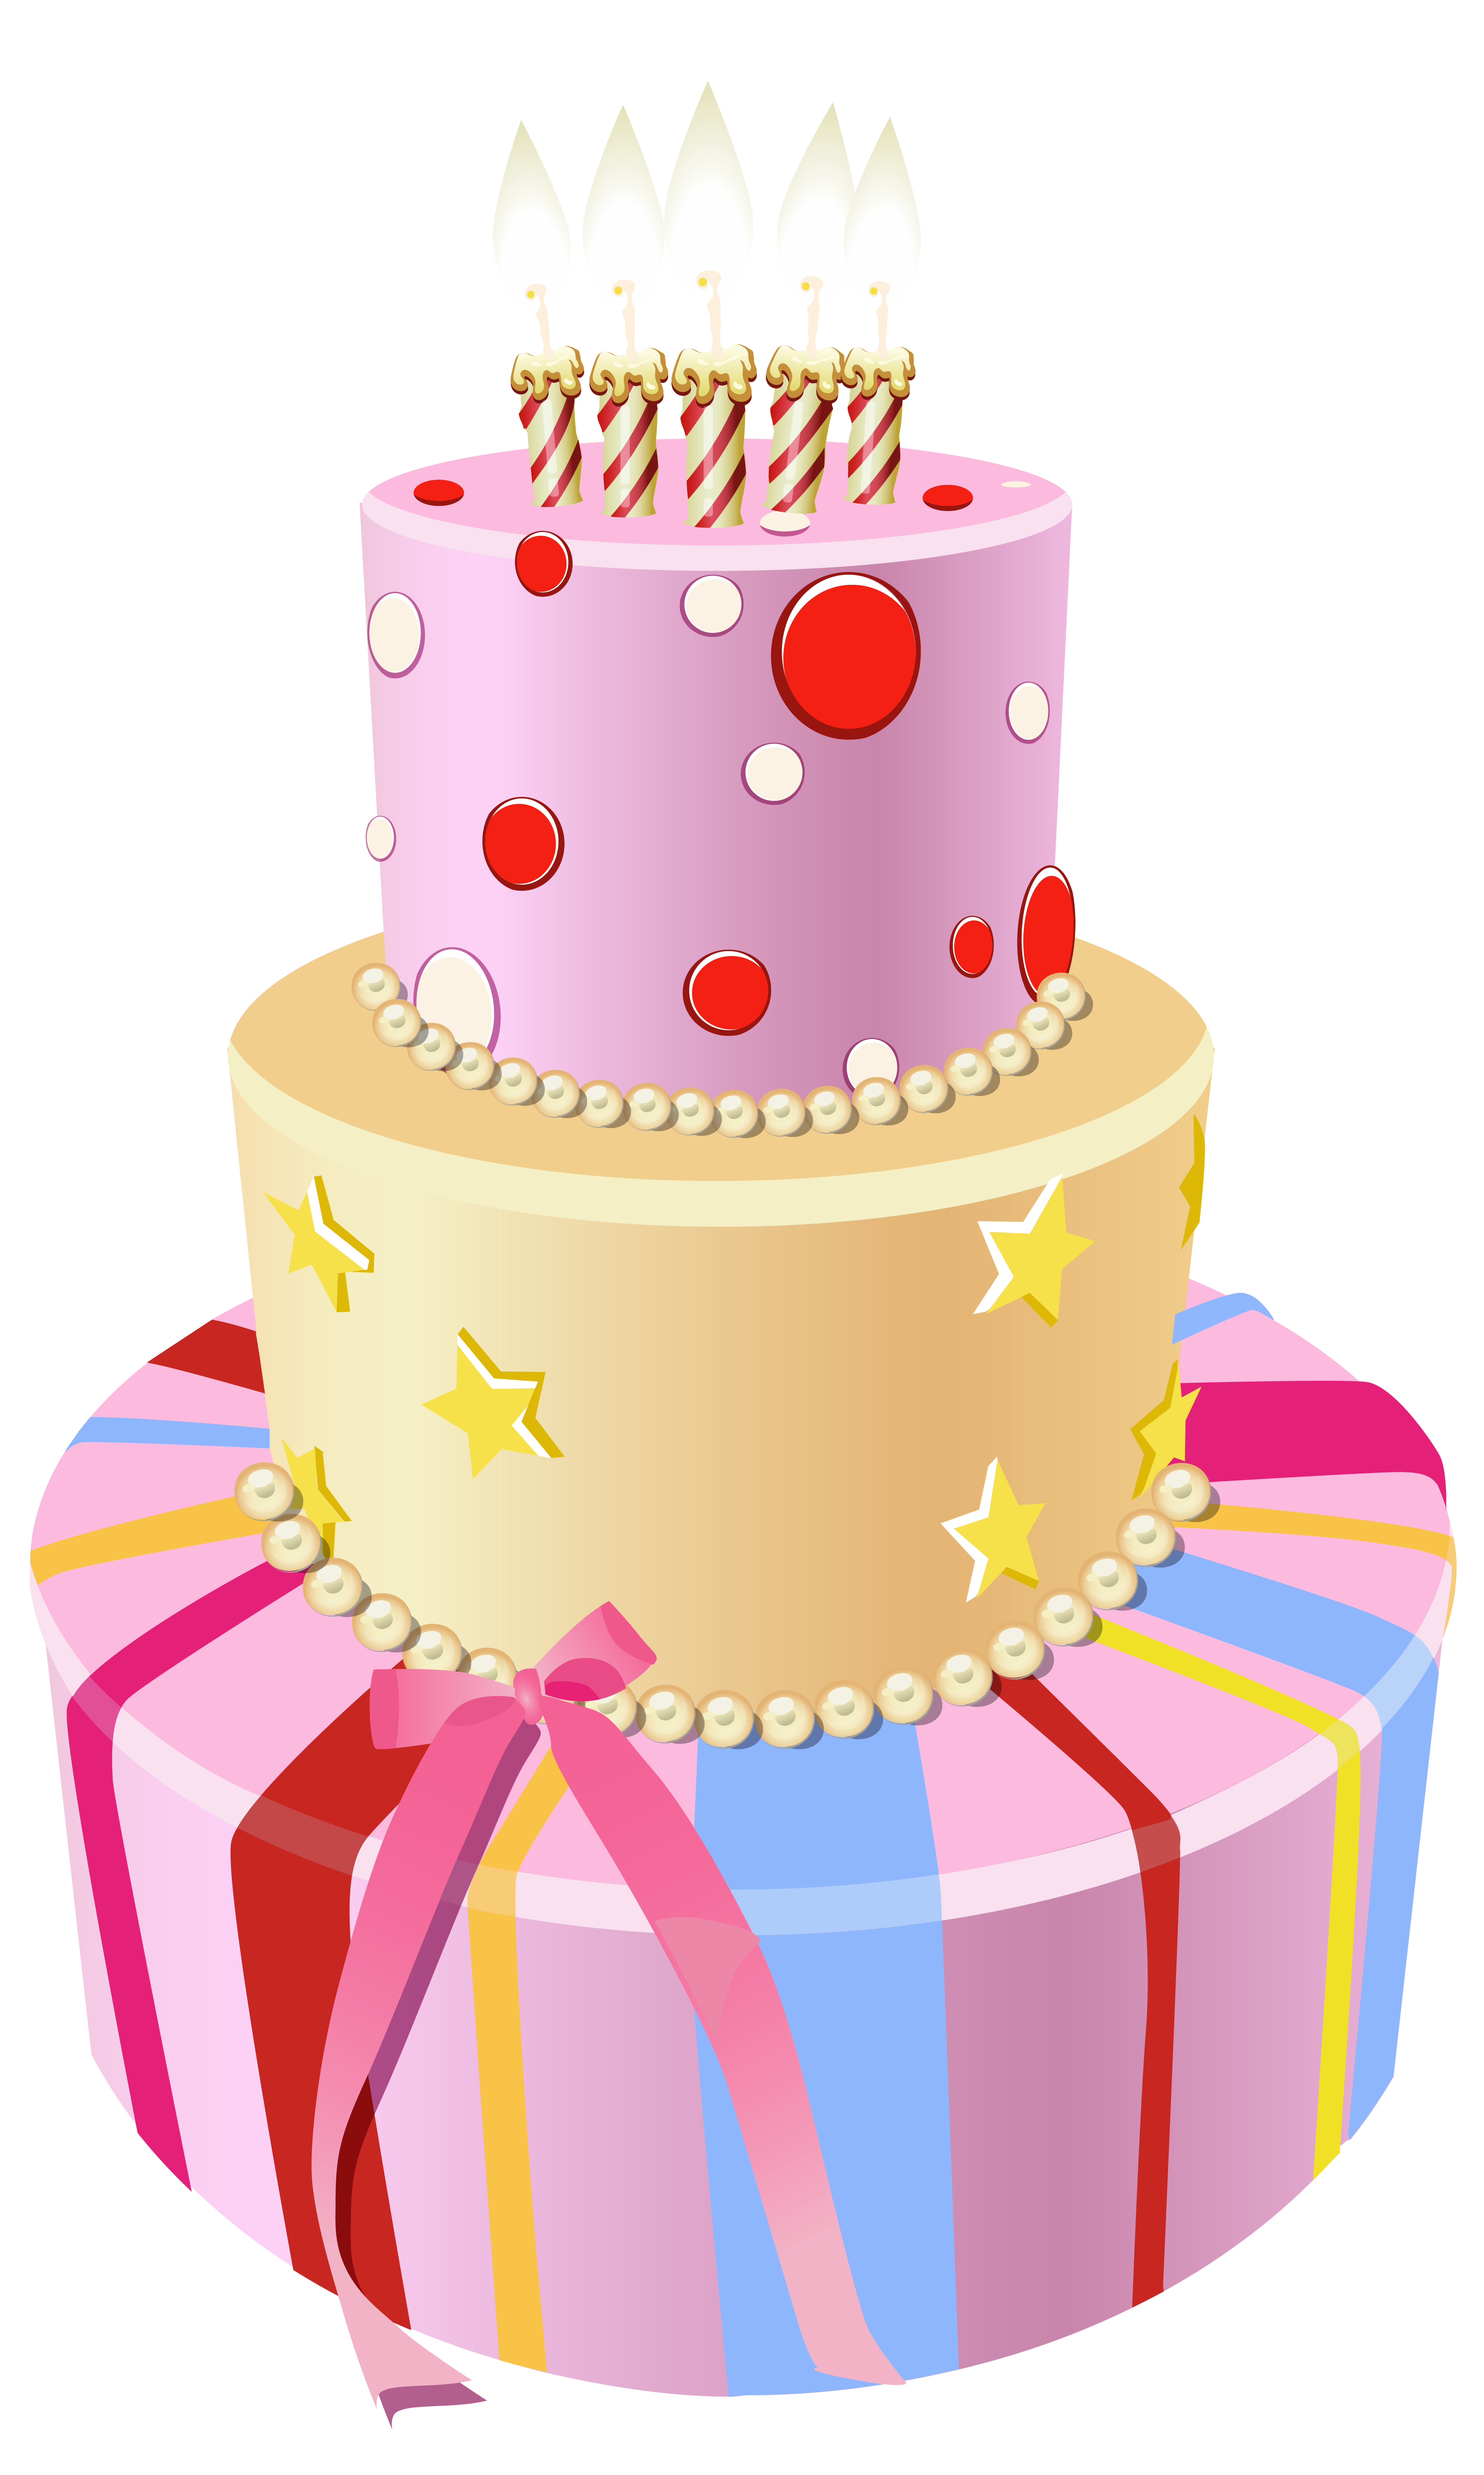 Cake Png Stock Illustrations – 1,652 Cake Png Stock Illustrations, Vectors  & Clipart - Dreamstime